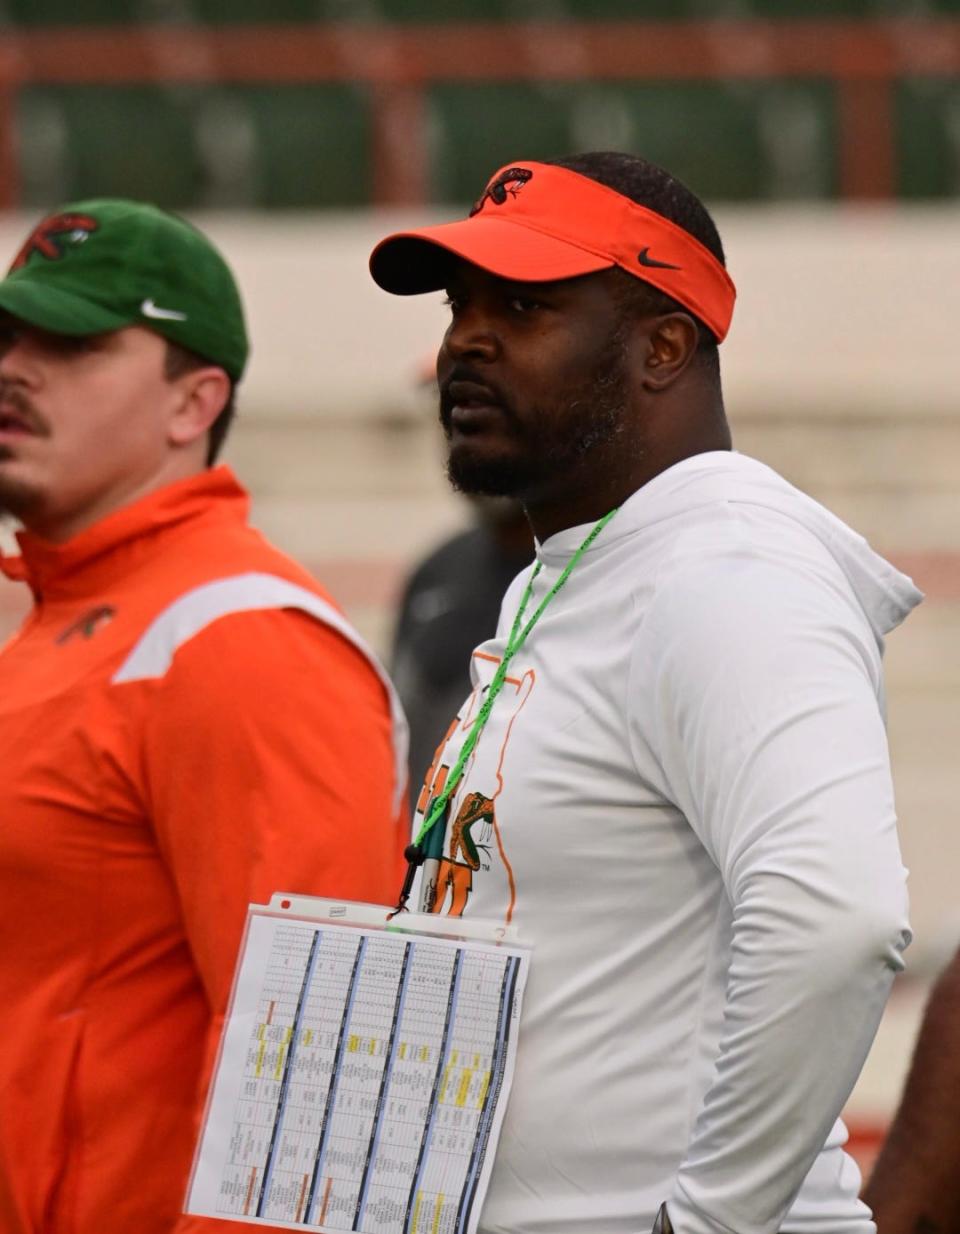 Florida A&M football head coach Willie Simmons looks on during the third day of spring practice at Bragg Memorial Stadium in Tallahassee, Florida on Friday, March 10, 2023